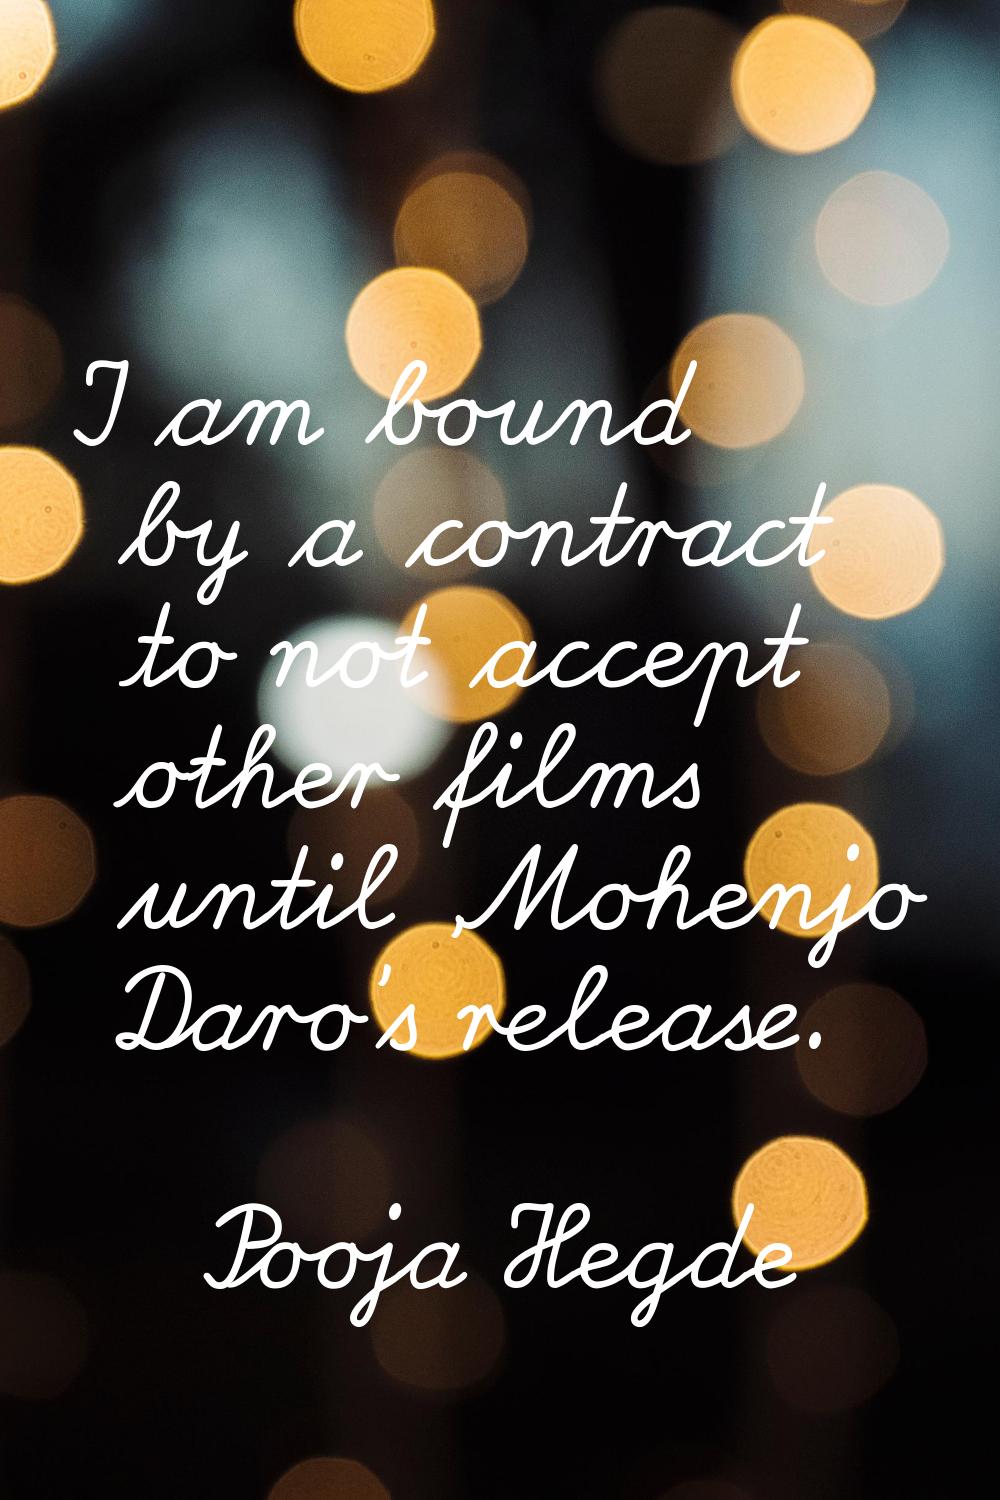 I am bound by a contract to not accept other films until 'Mohenjo Daro's release.